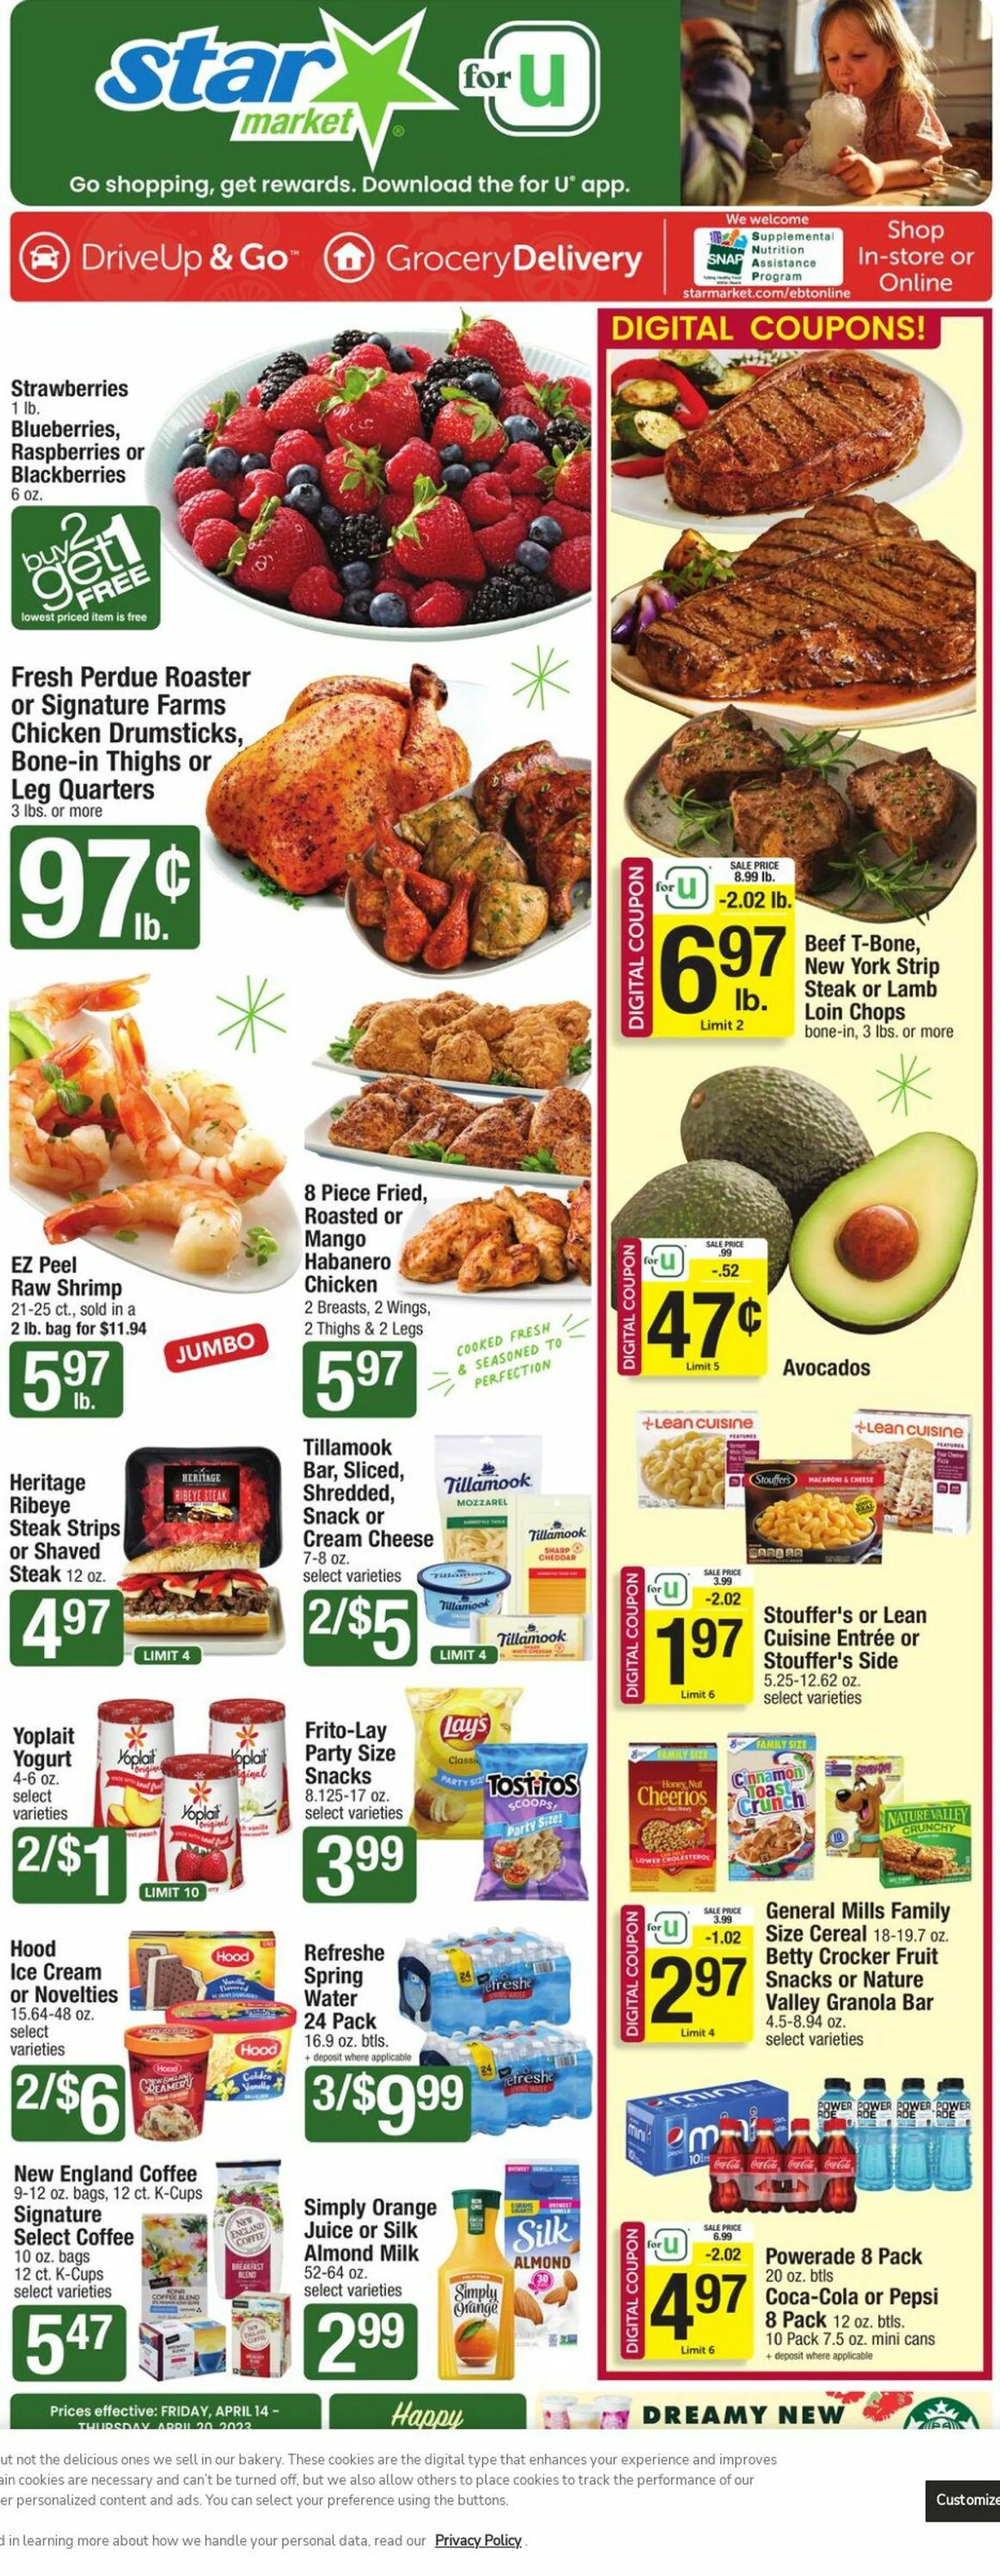 Star Market Current weekly ad - 1